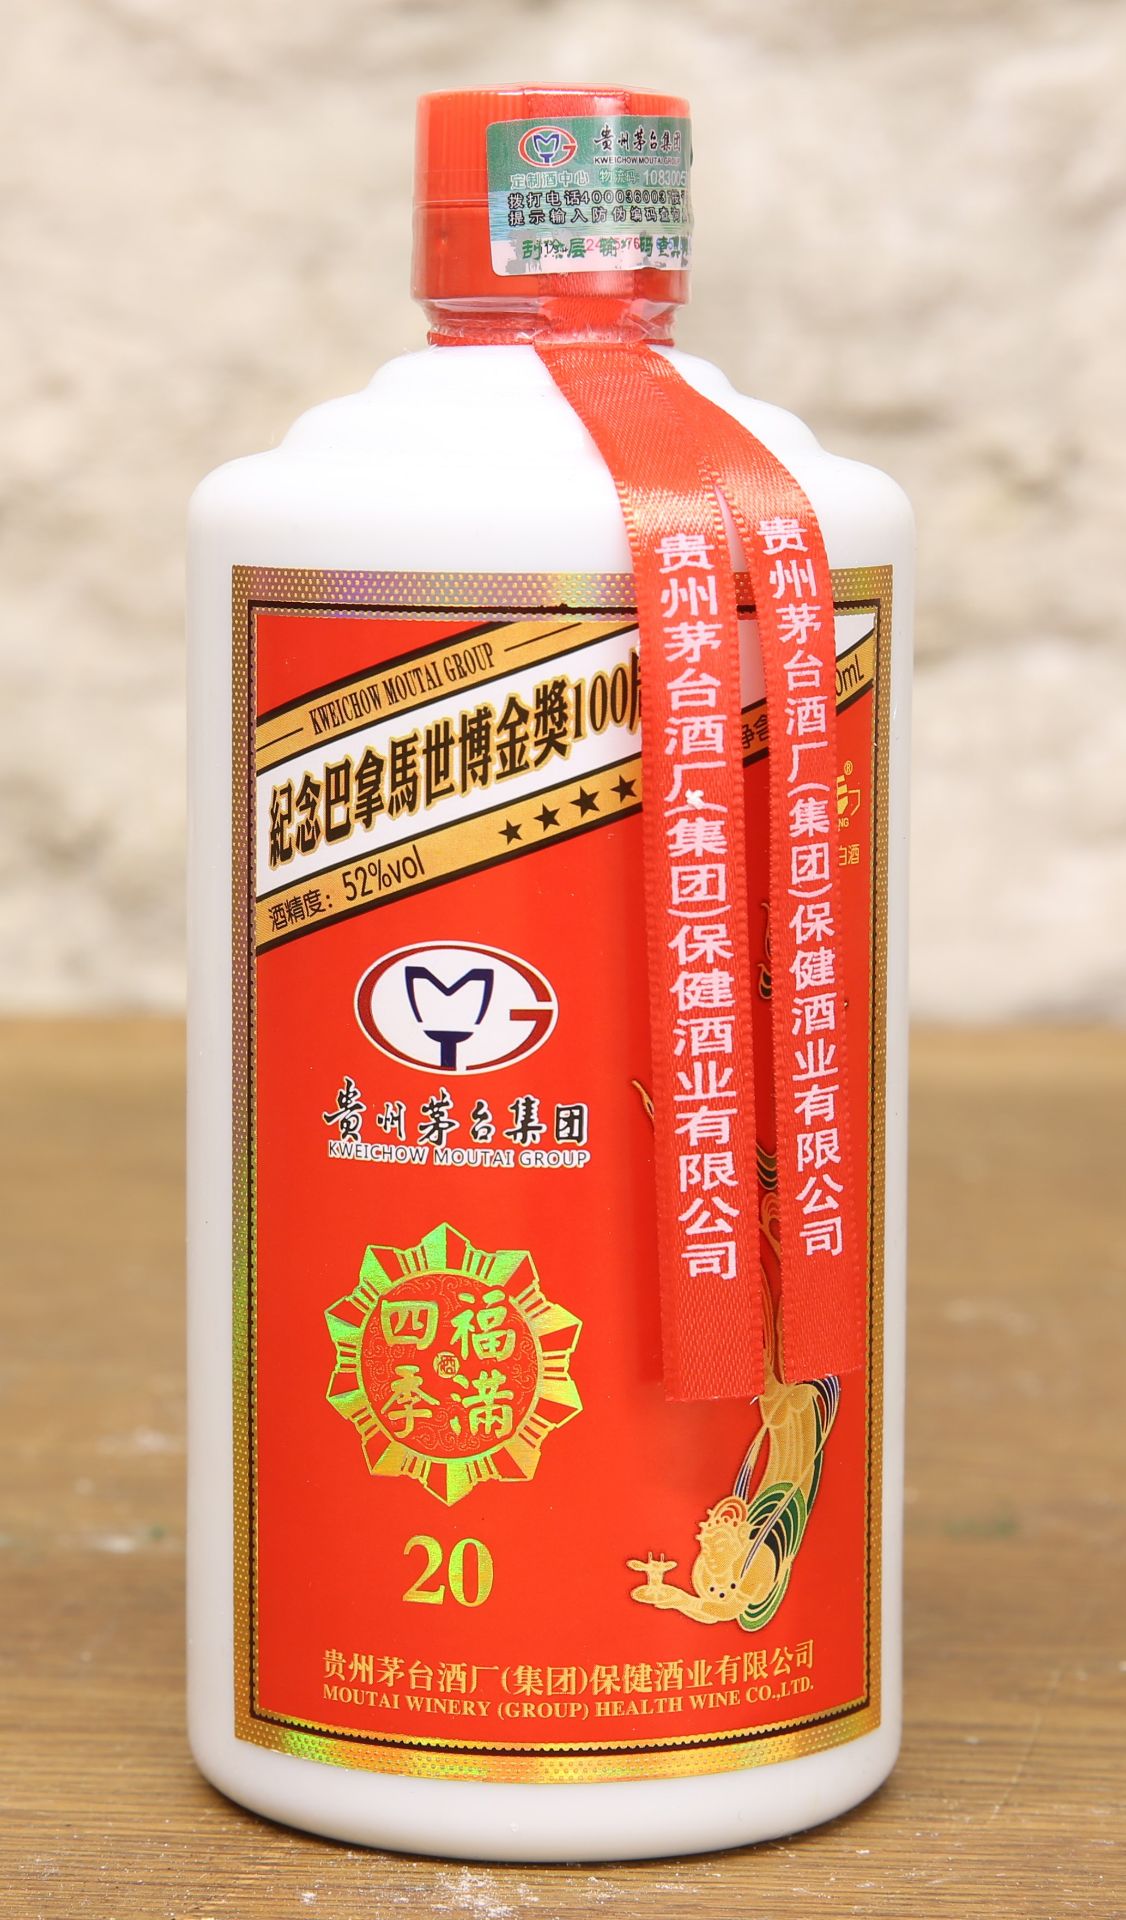 1 50cl. BOTTLE KWEICHOW MOUTAI ‘FLYING FAIRY’ “KWEICHOW MOUTAI GROUP” ‘20’ AN EXCEPTIONALLY RARE AN - Image 2 of 2